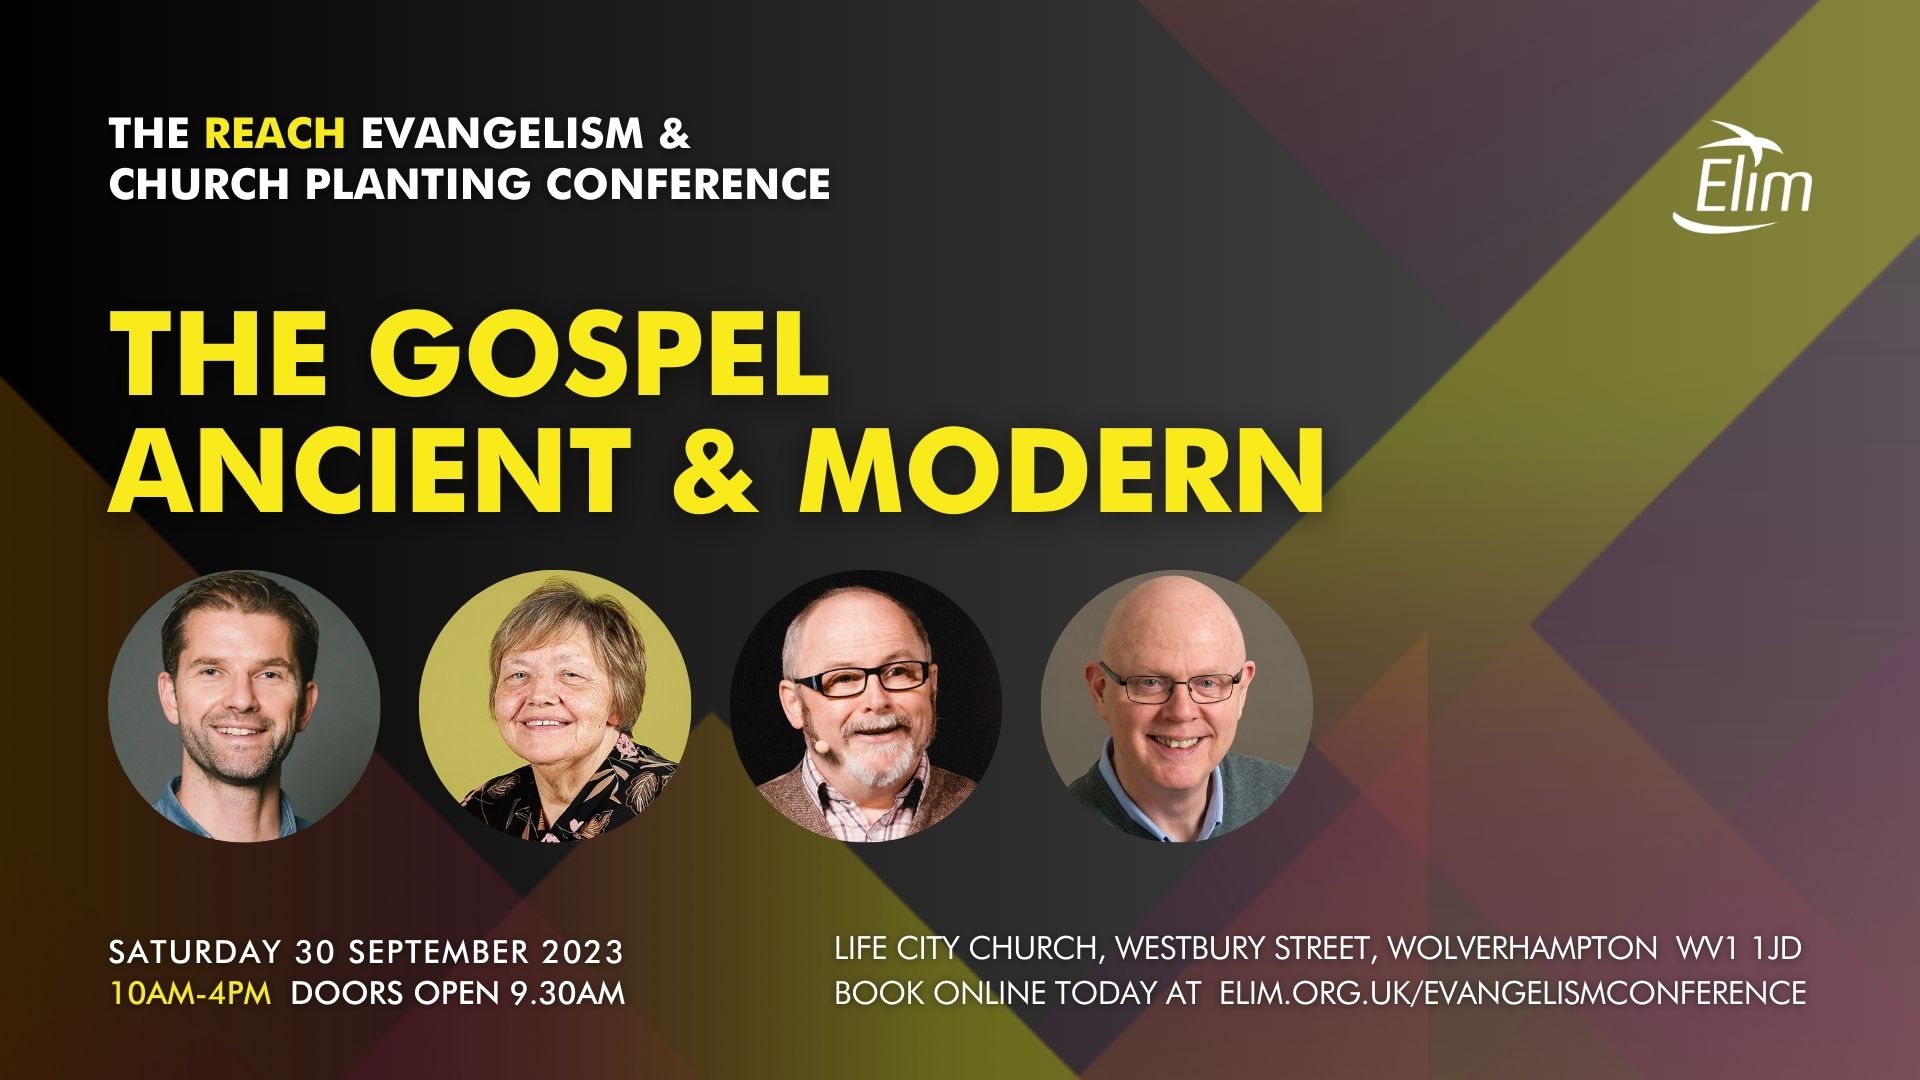 Elim REACH Evangelism and Church Planting Conference